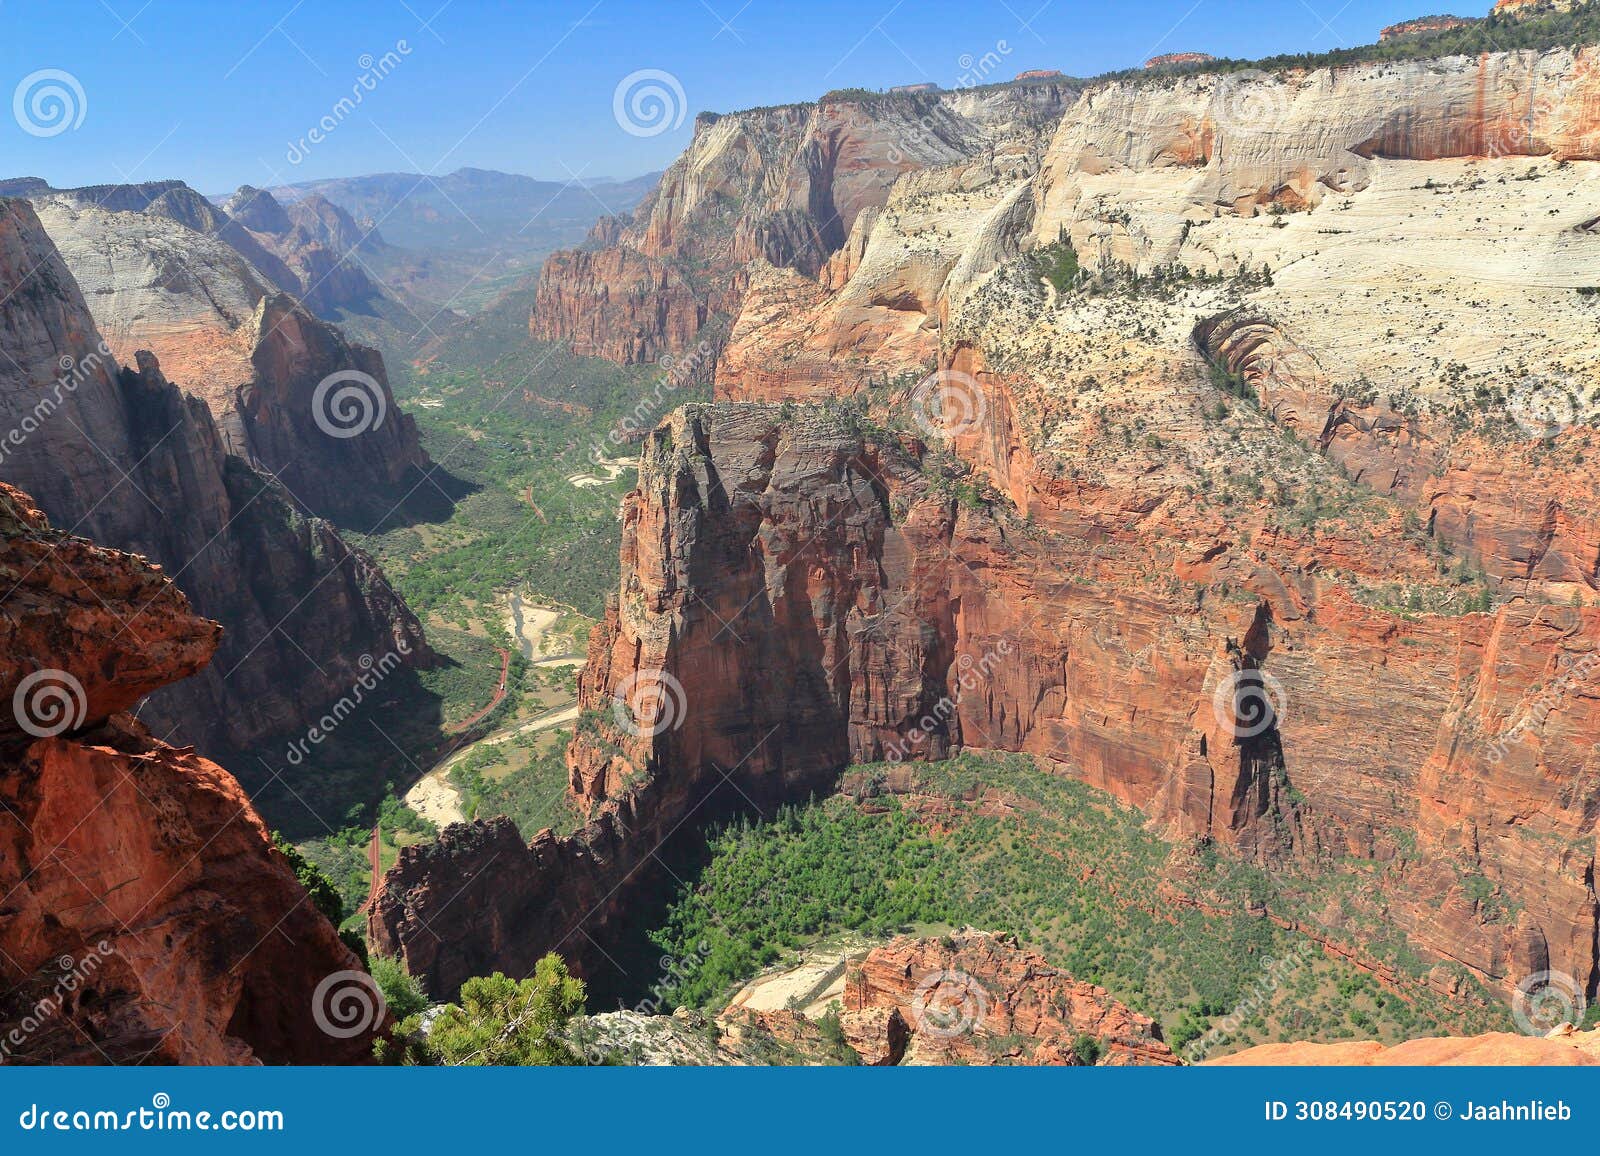 zion national park with virgin river canyon and angels landing from observation point, utah